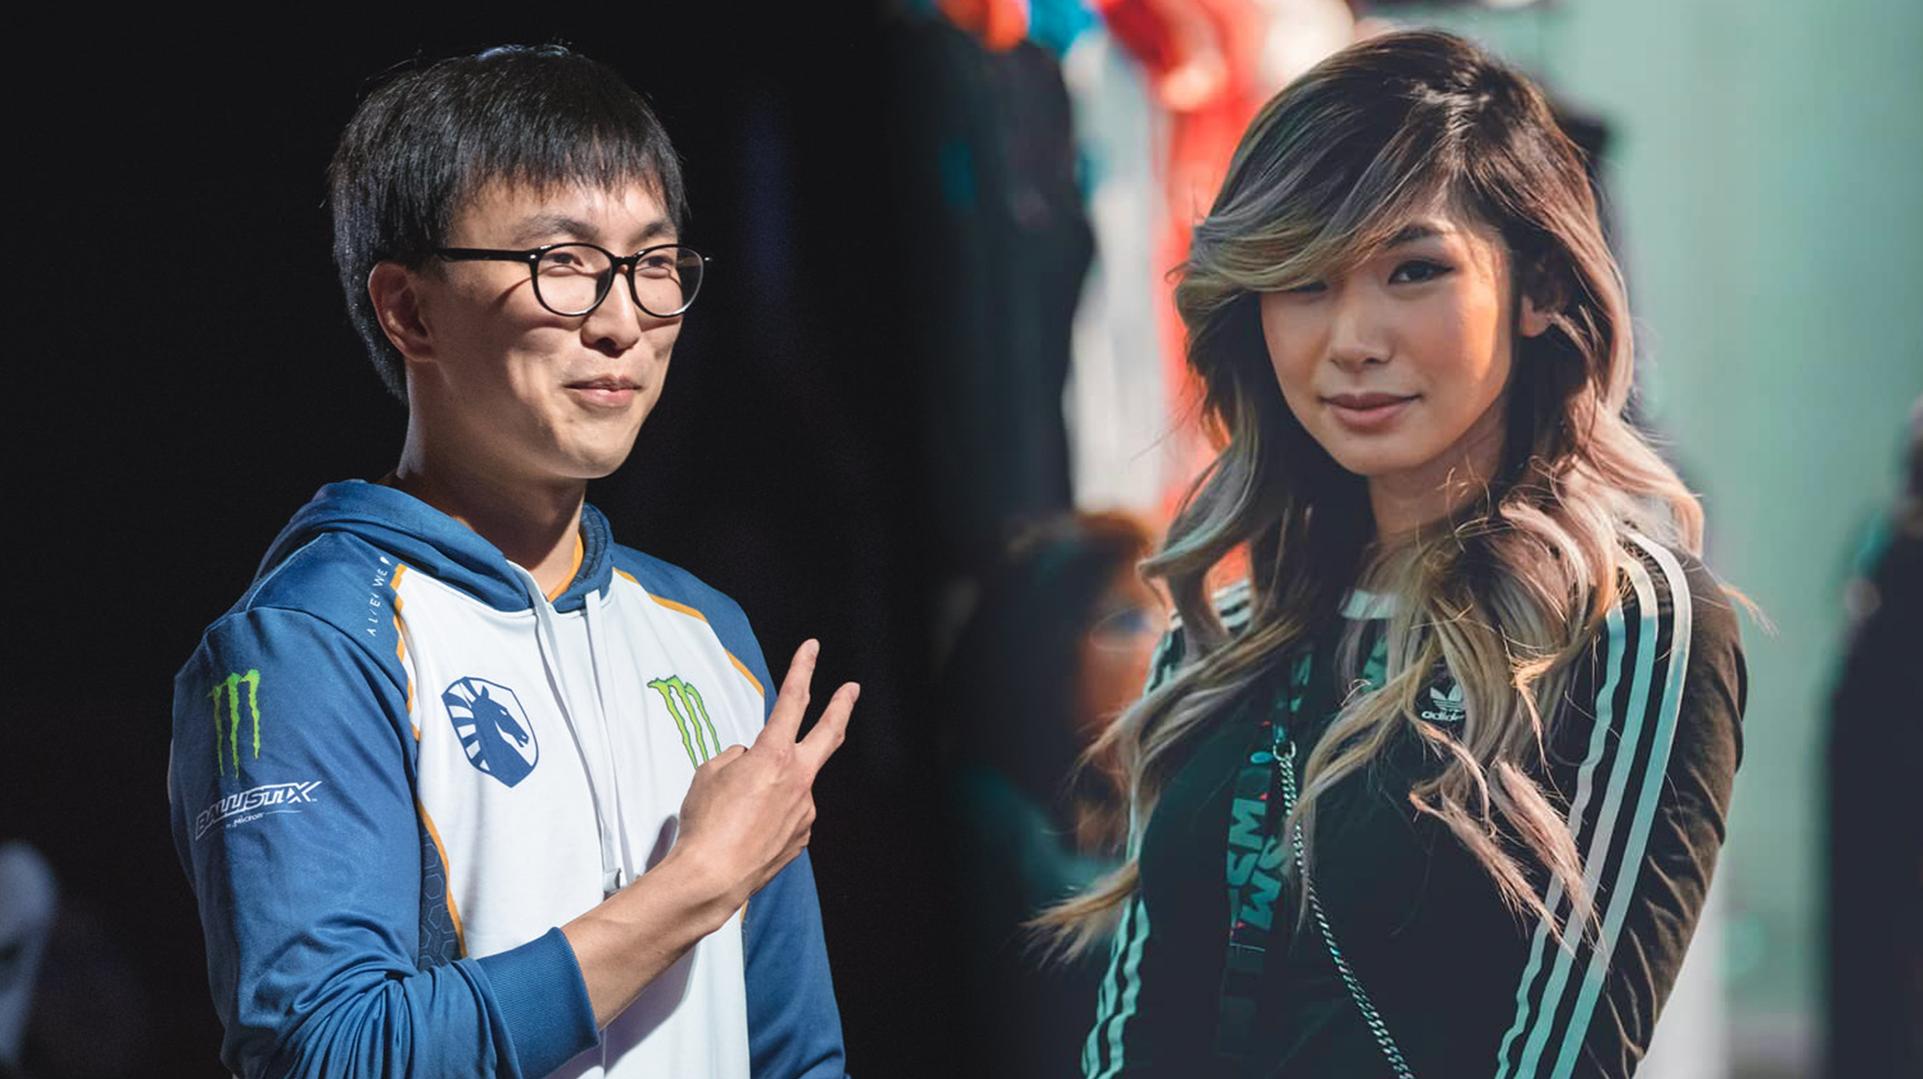 Doublelift and Leena have had their relationship in the spotlight since Peng's high-profile return to TSM.